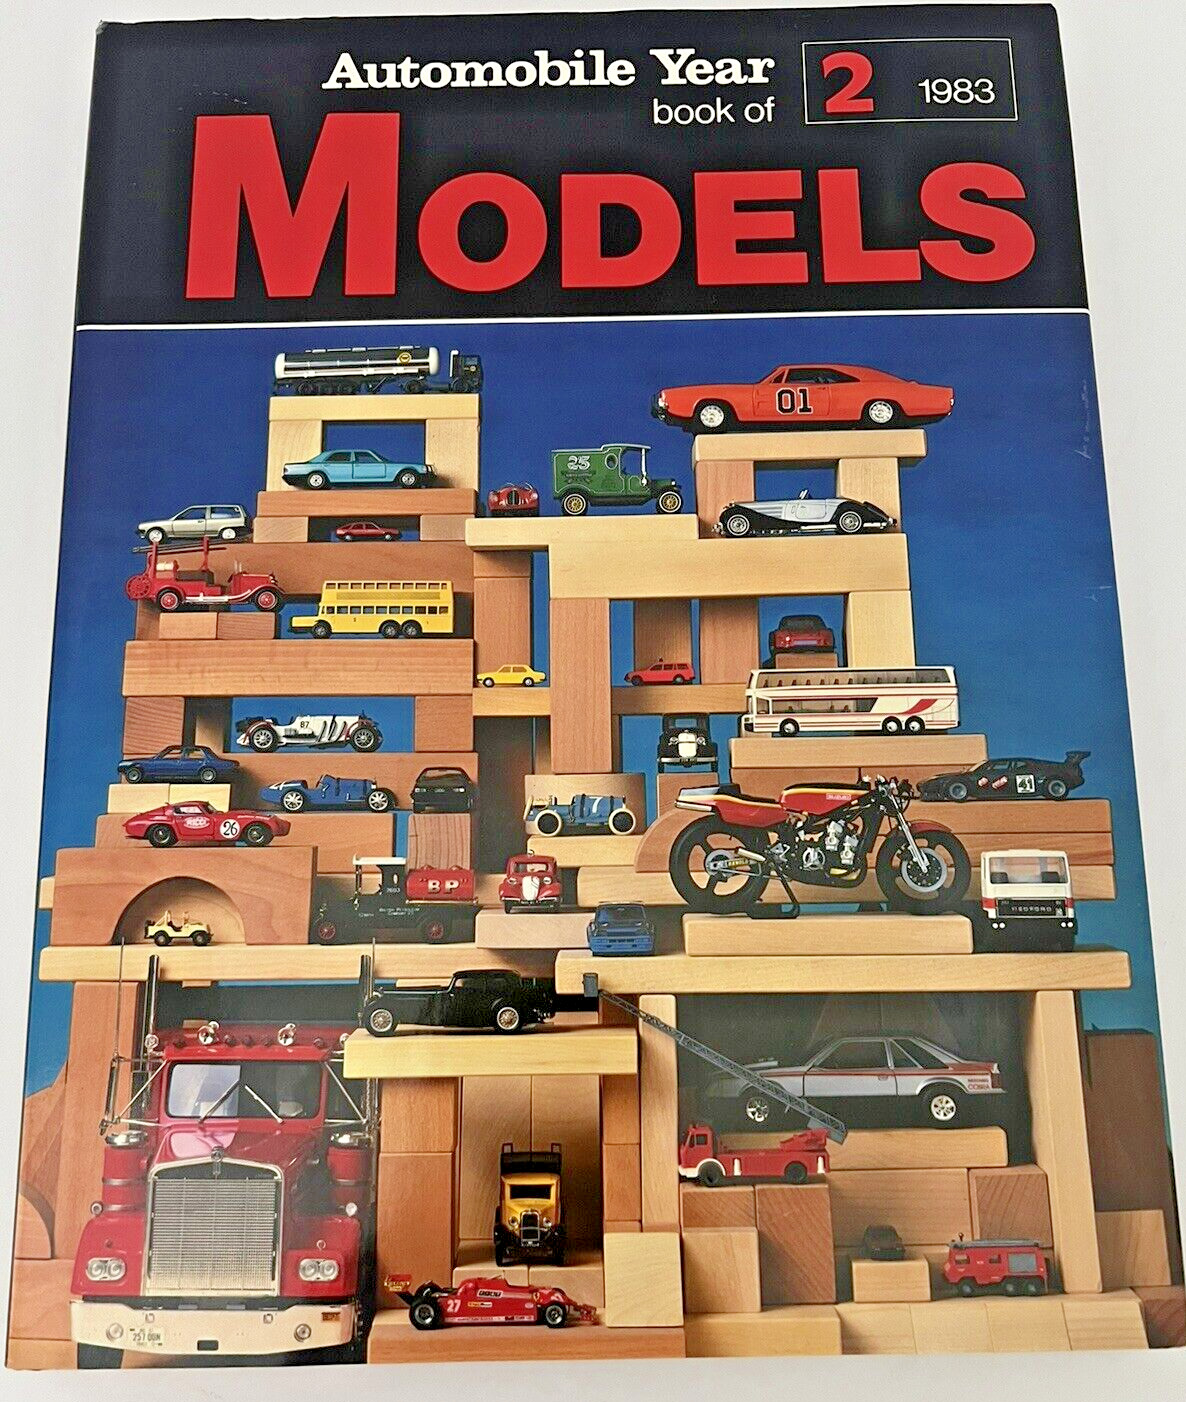 Automobile Year Book of Models No. 2 Vintage 1983 Edita Lausanne Hardcover